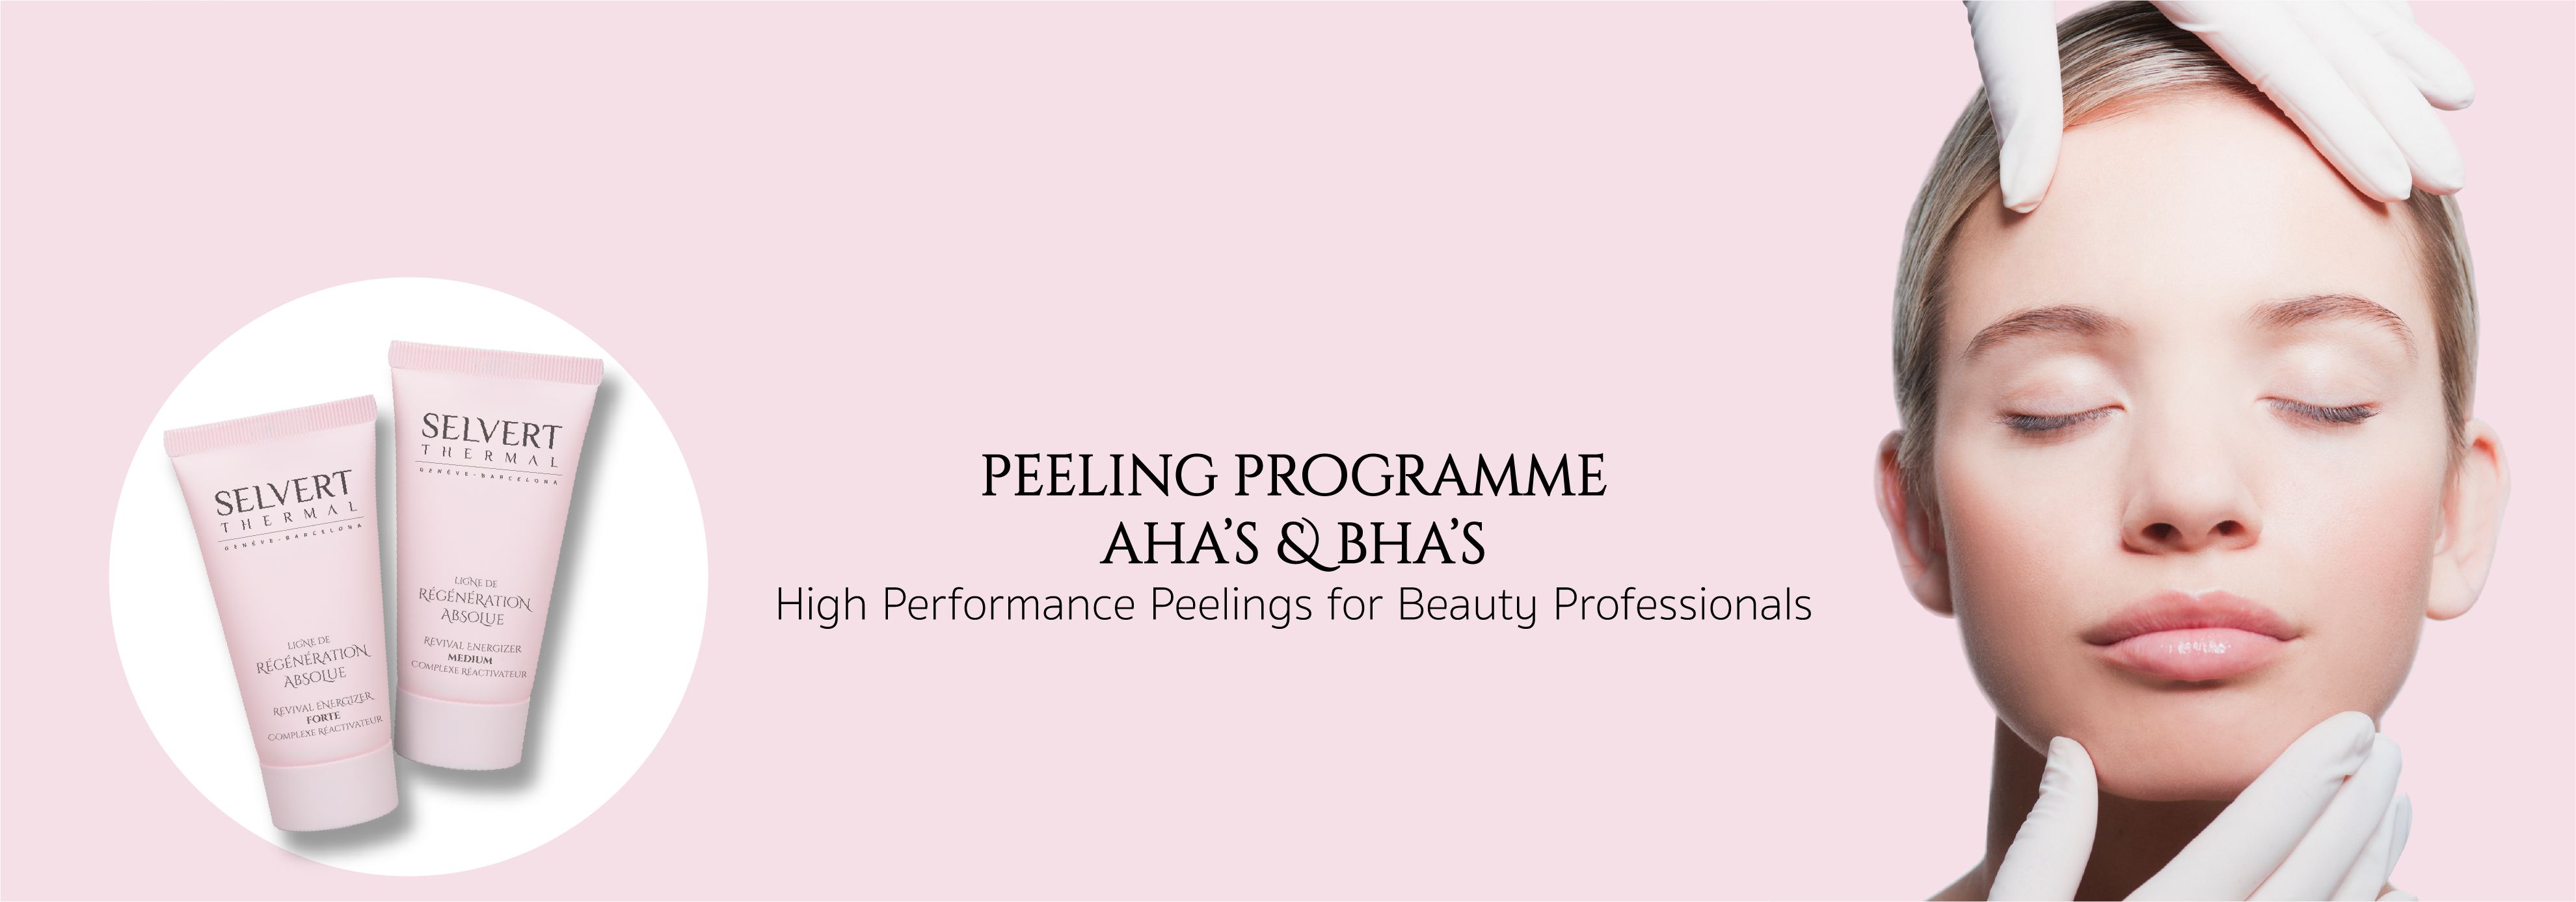 PEELING PROGRAMME <h4 style="text-align: center;">PEELING PROGRAMME AHA'S &amp; BH'AS</h4>
<p style="text-align: justify;">&nbsp;</p>
<p style="text-align: justify;">The Peeling Programme is a blend of AHAs and BHAs for professional use, the formulation and combination in acids of which offer an effective response to spots, acne prone and/or seborrheic skin at each stage of ageing.</p>
<p style="text-align: justify;">PEELING PROGRAMME AHA'S &amp; BHA'S</p>
<p style="text-align: justify;">Peeling M5% - L5% combination of acids, designed to eliminate or attenuate acquired melanin-based skin spots.</p>
<p style="text-align: justify;">Peeling S2% - M8%, combination of acids indicated for thick, oily, seborrheic and acne prone skin types.</p>
<p style="text-align: justify;">Peeling M4% - G6%, combination of acids with high transepidermal penetrative capacity for combating all stages of skin ageing and acne scars.</p>
<p style="text-align: justify;">Effective blends of hydro acids (AHA's &amp; BHA's) for the professional to treat the main problems of the facial skin and allow a powerful skin renewal.</p>